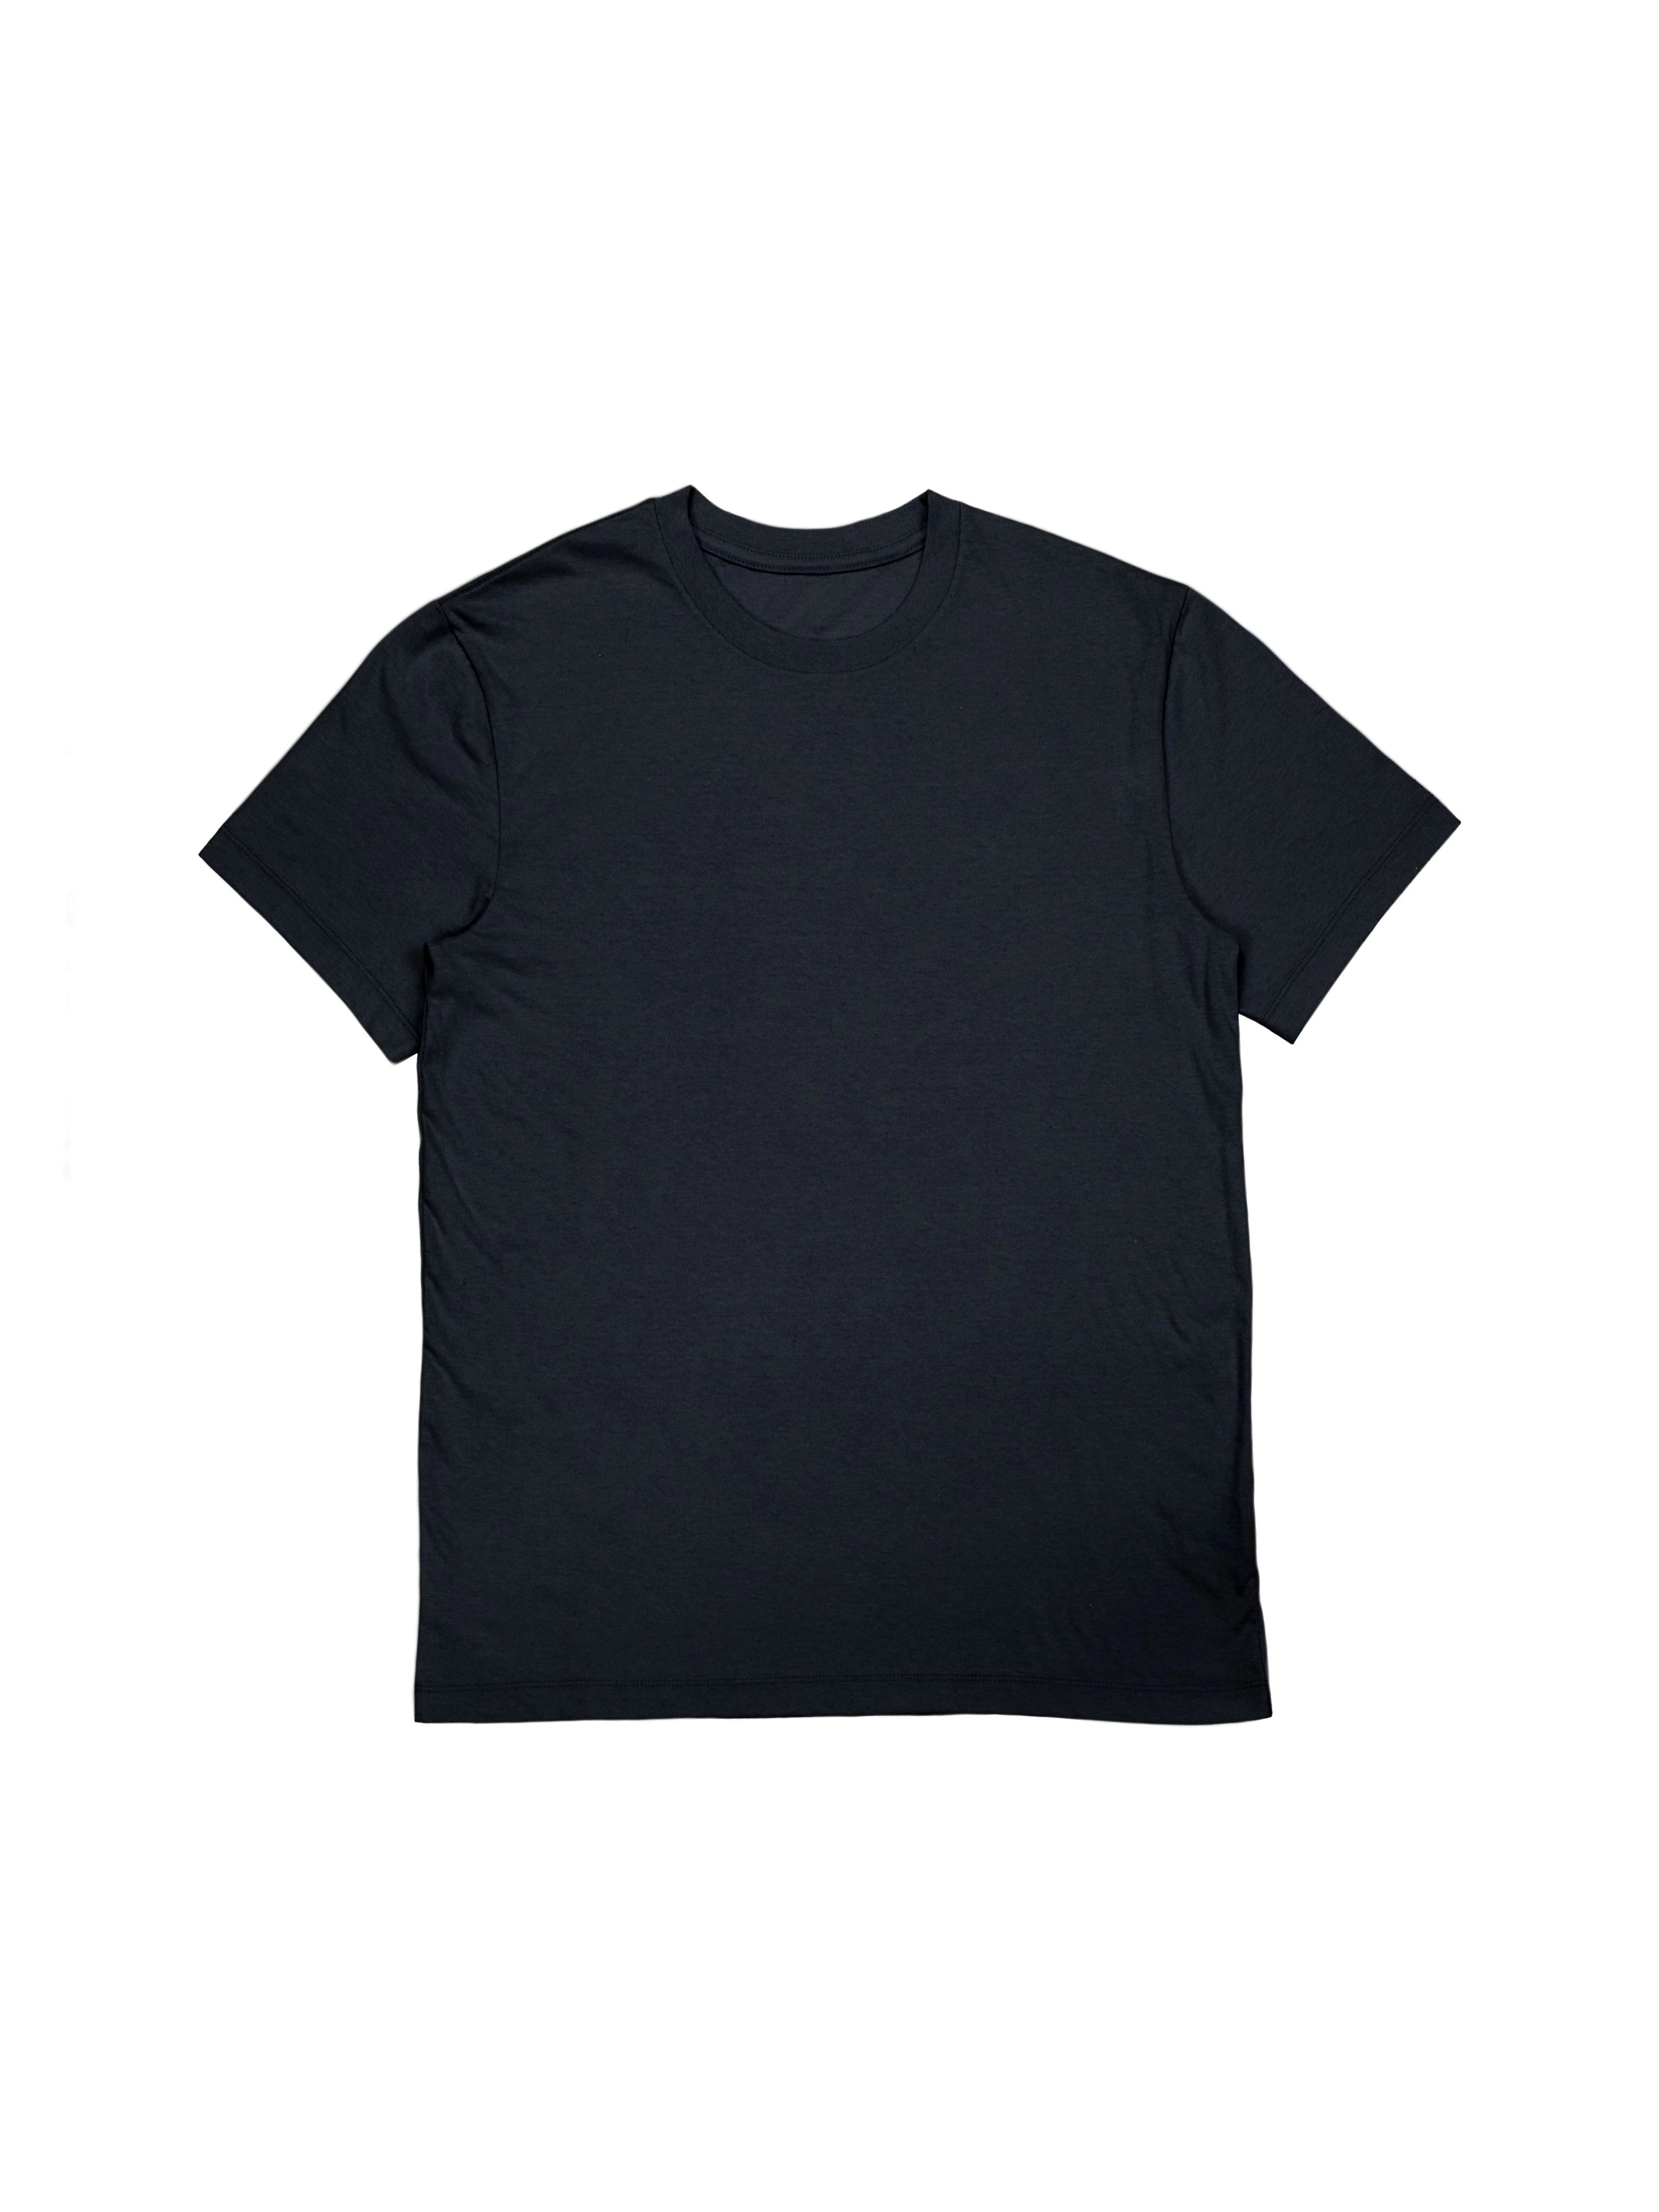 BOXY Fit Black T-Shirt Essential - 100% Organic Cotton Made In Canada ...